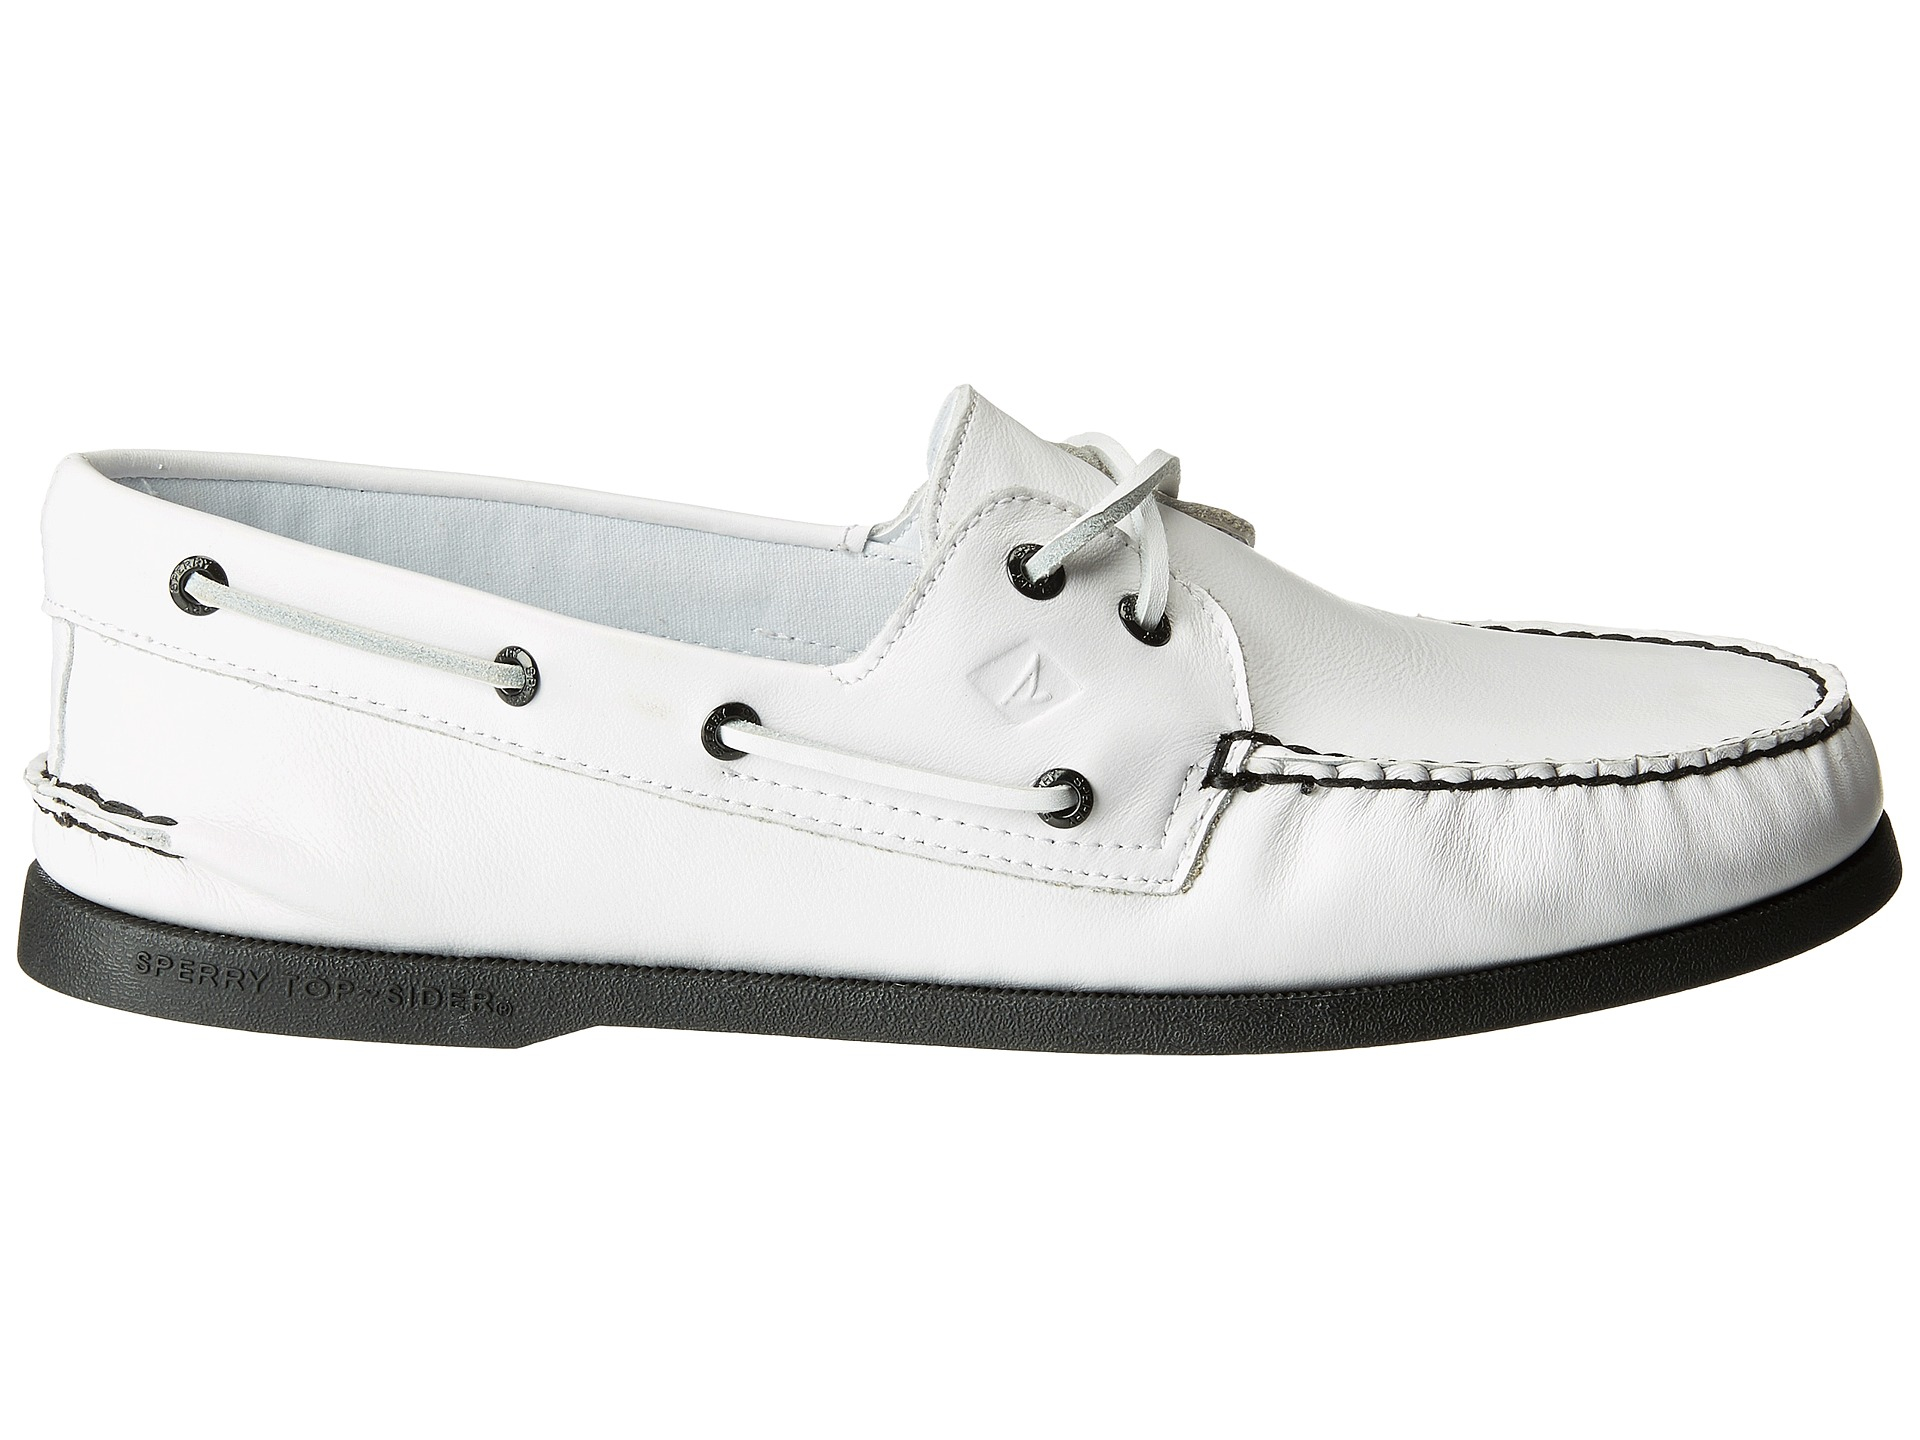 Lyst - Sperry Top-Sider A/o 2-eye Cross Lace in White for Men